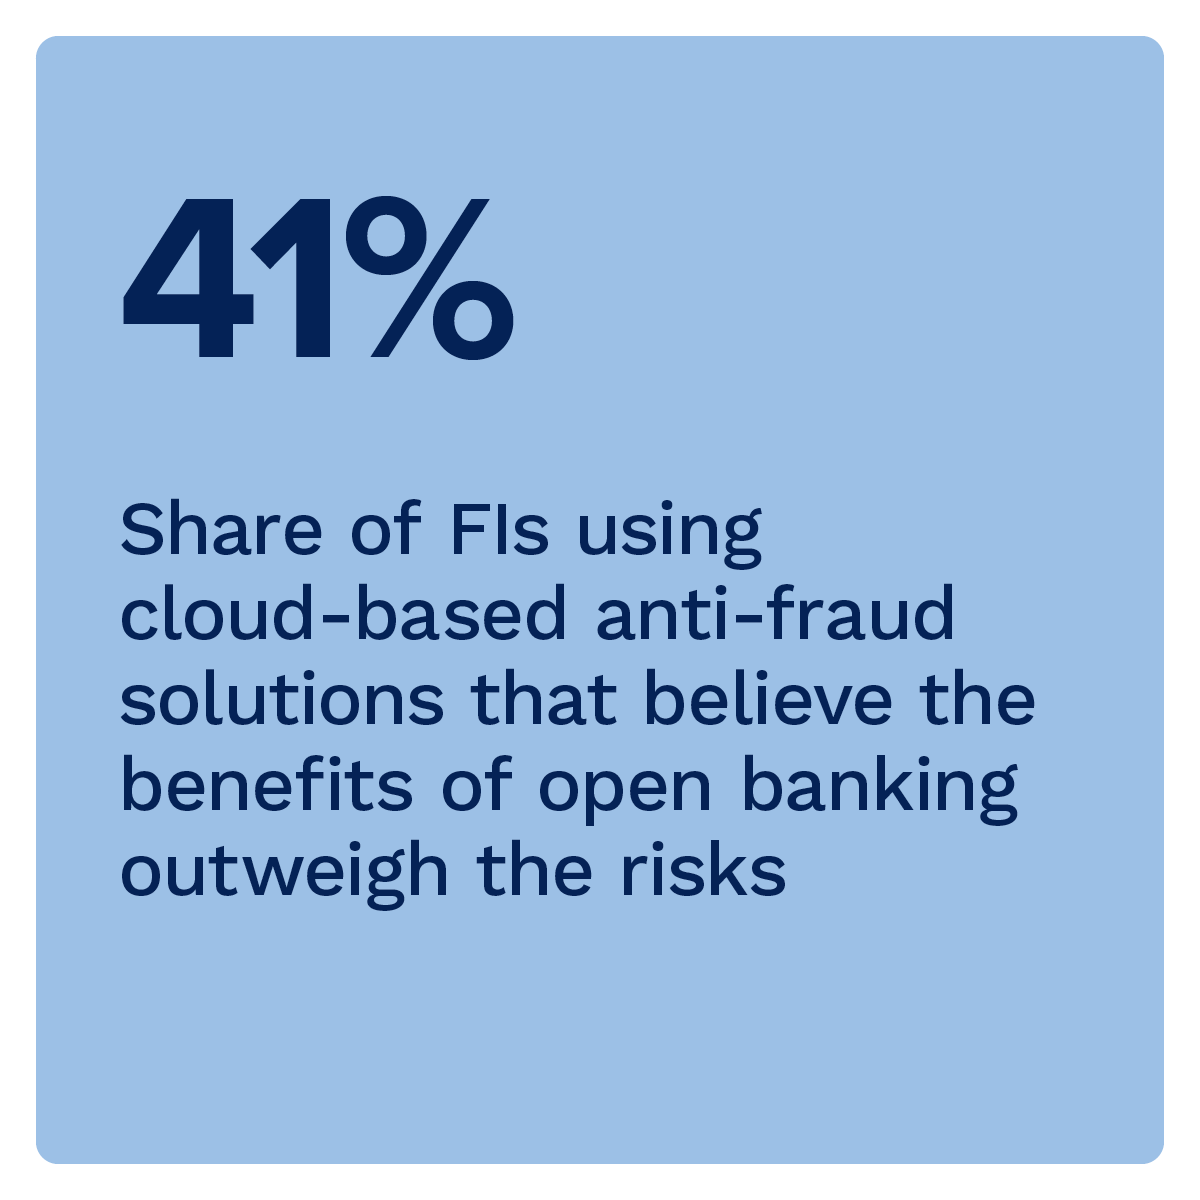 41%: Share of FIs using cloud-based anti-fraud solutions that believe the benefits of open banking outweigh the risks